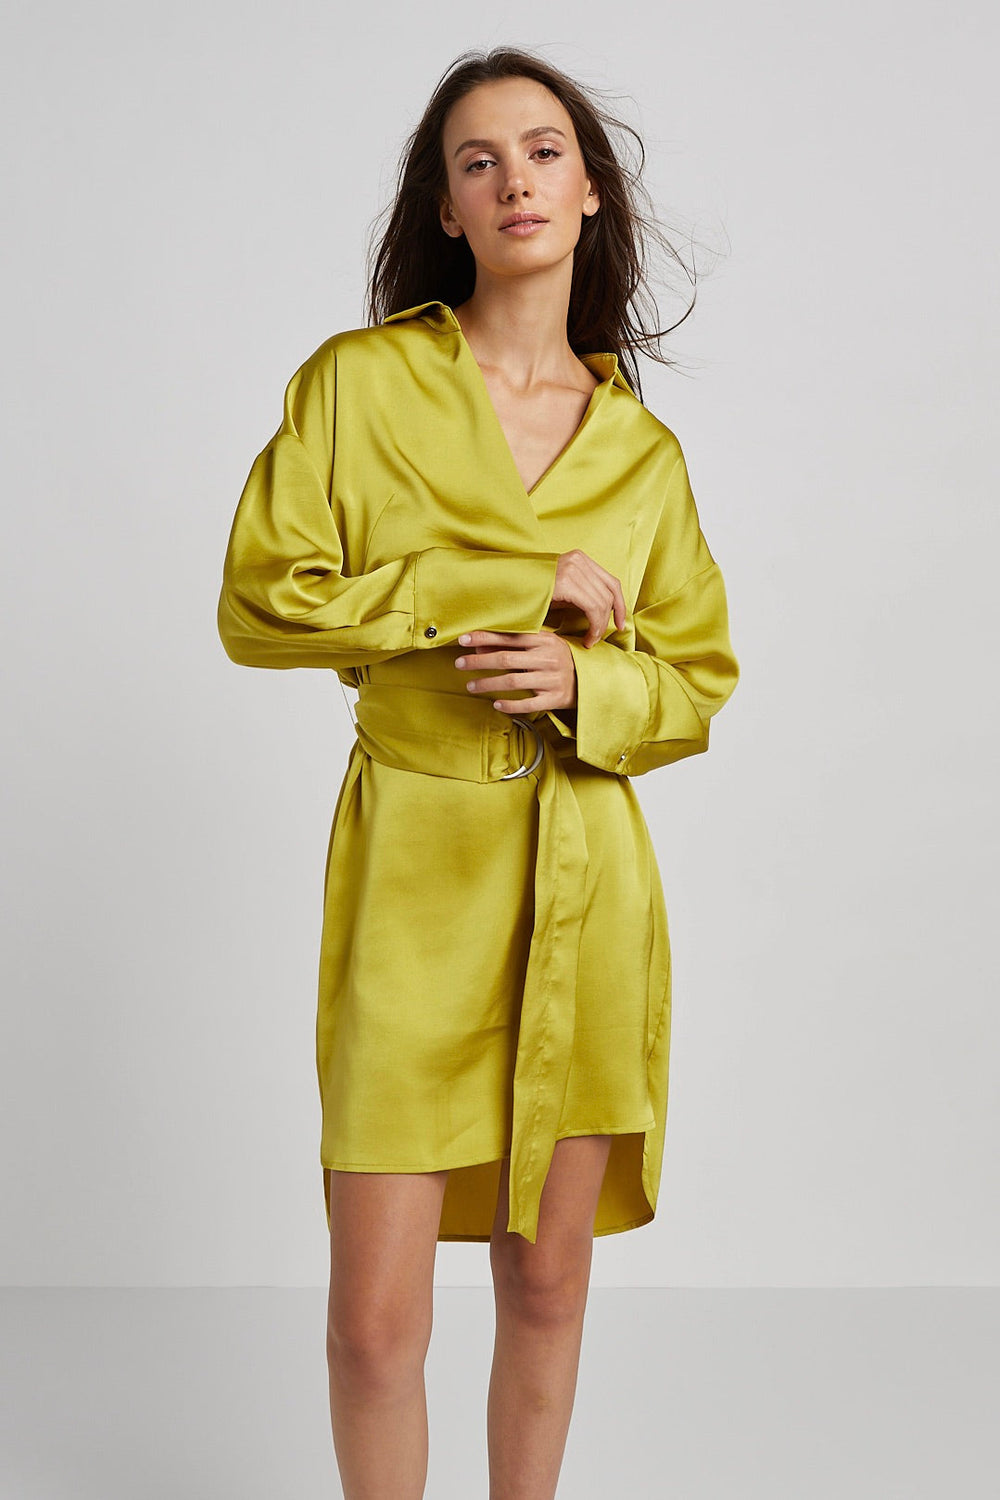 Adroit Atelier's Kyoko Pullover Dress in Chartreuse